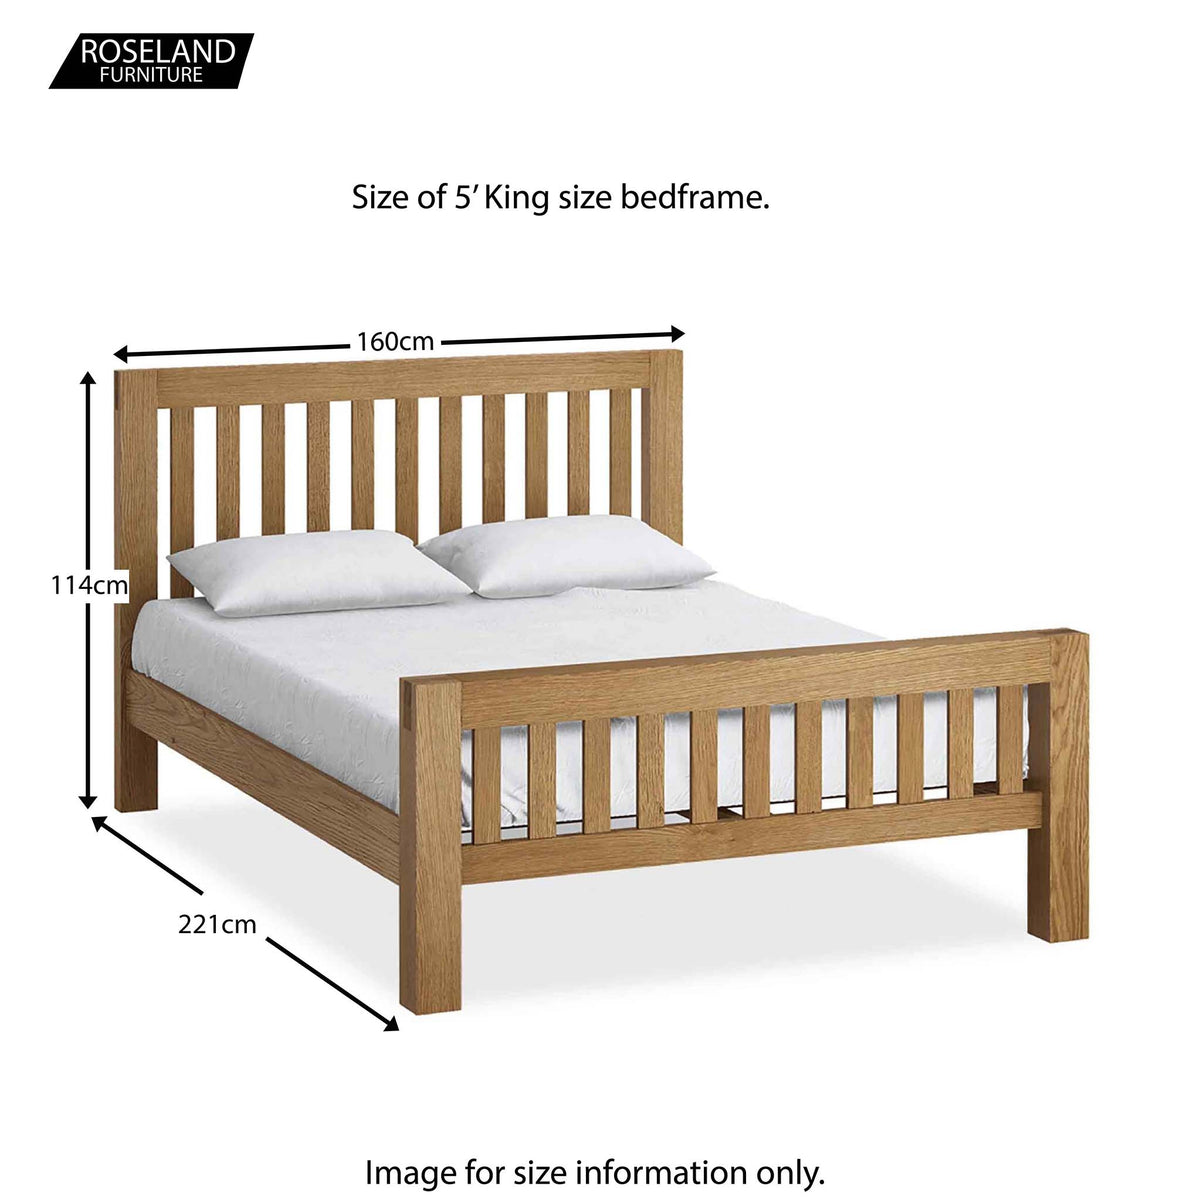 Abbey King Size Bed Frame - Size Guide